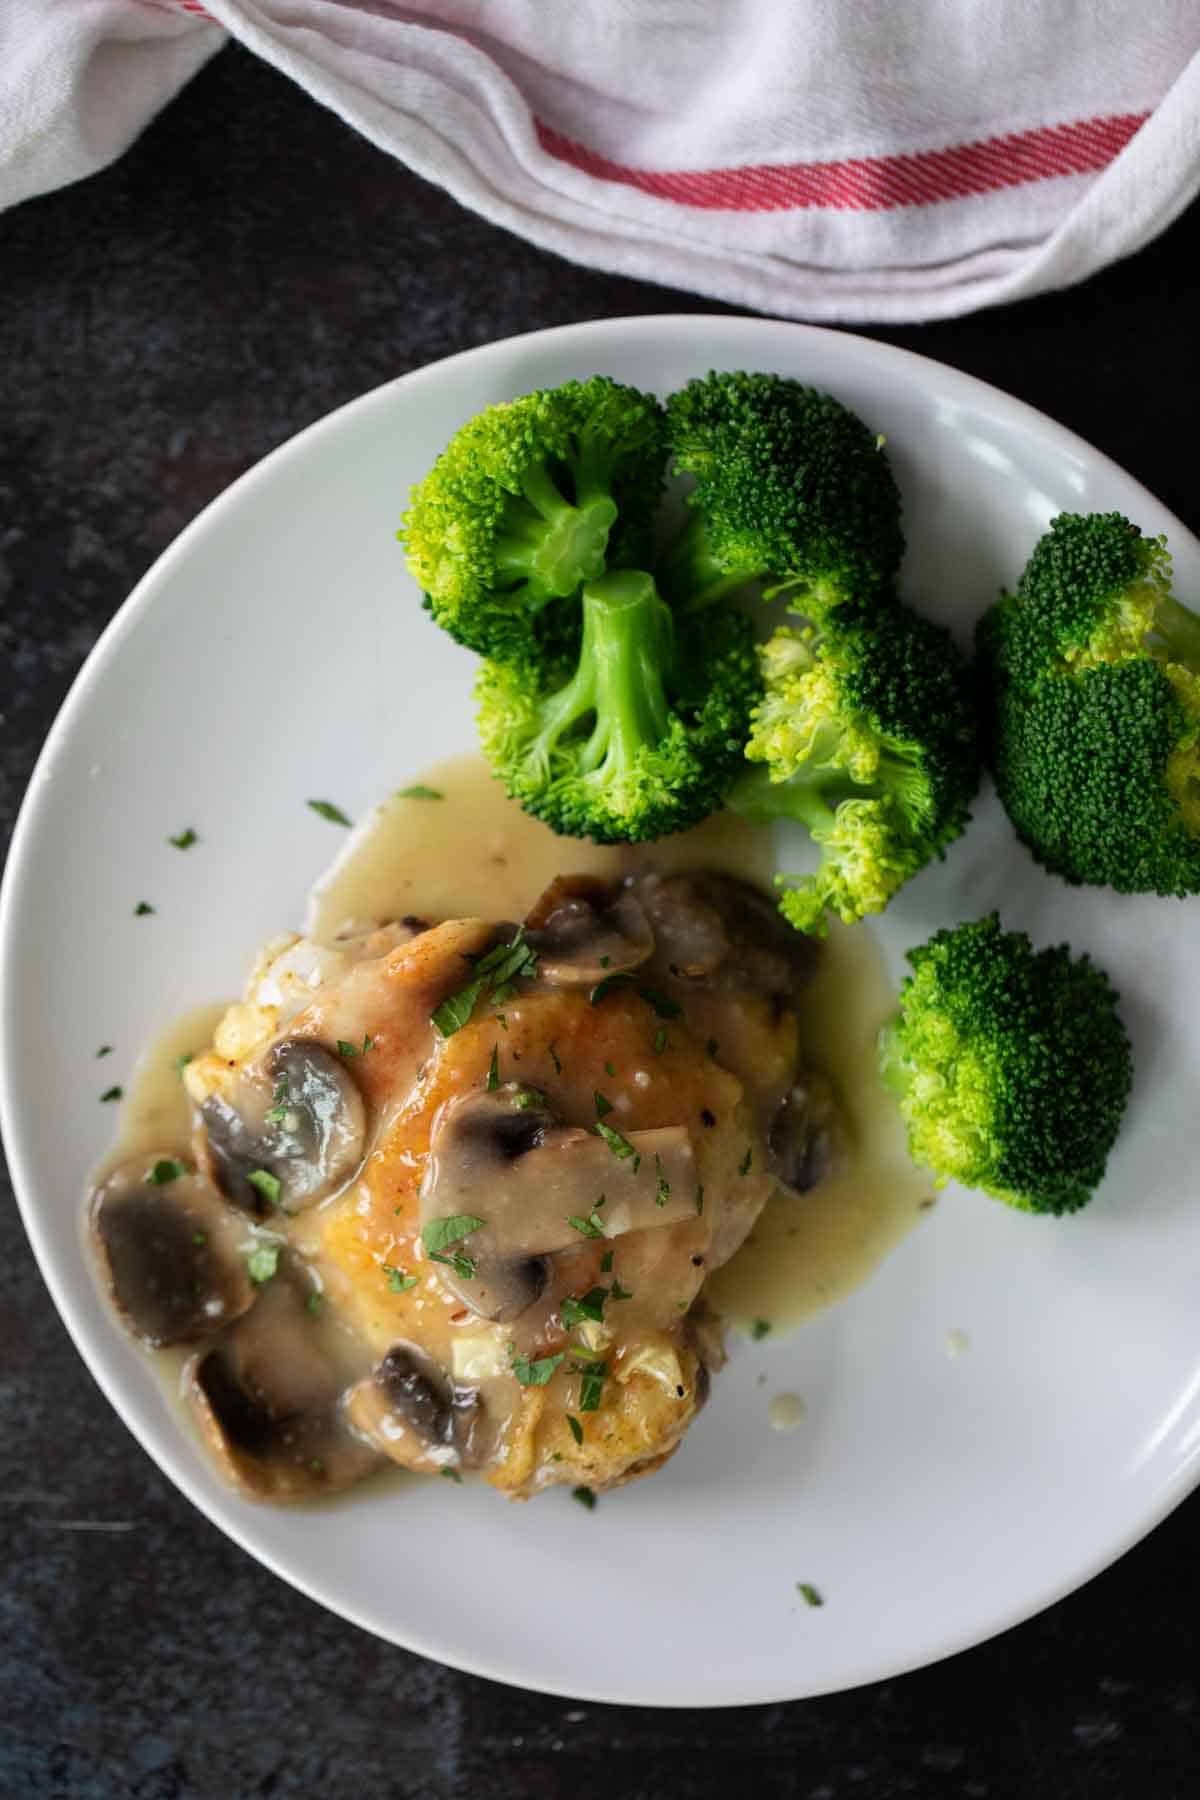 Chicken Supreme served with broccoli.